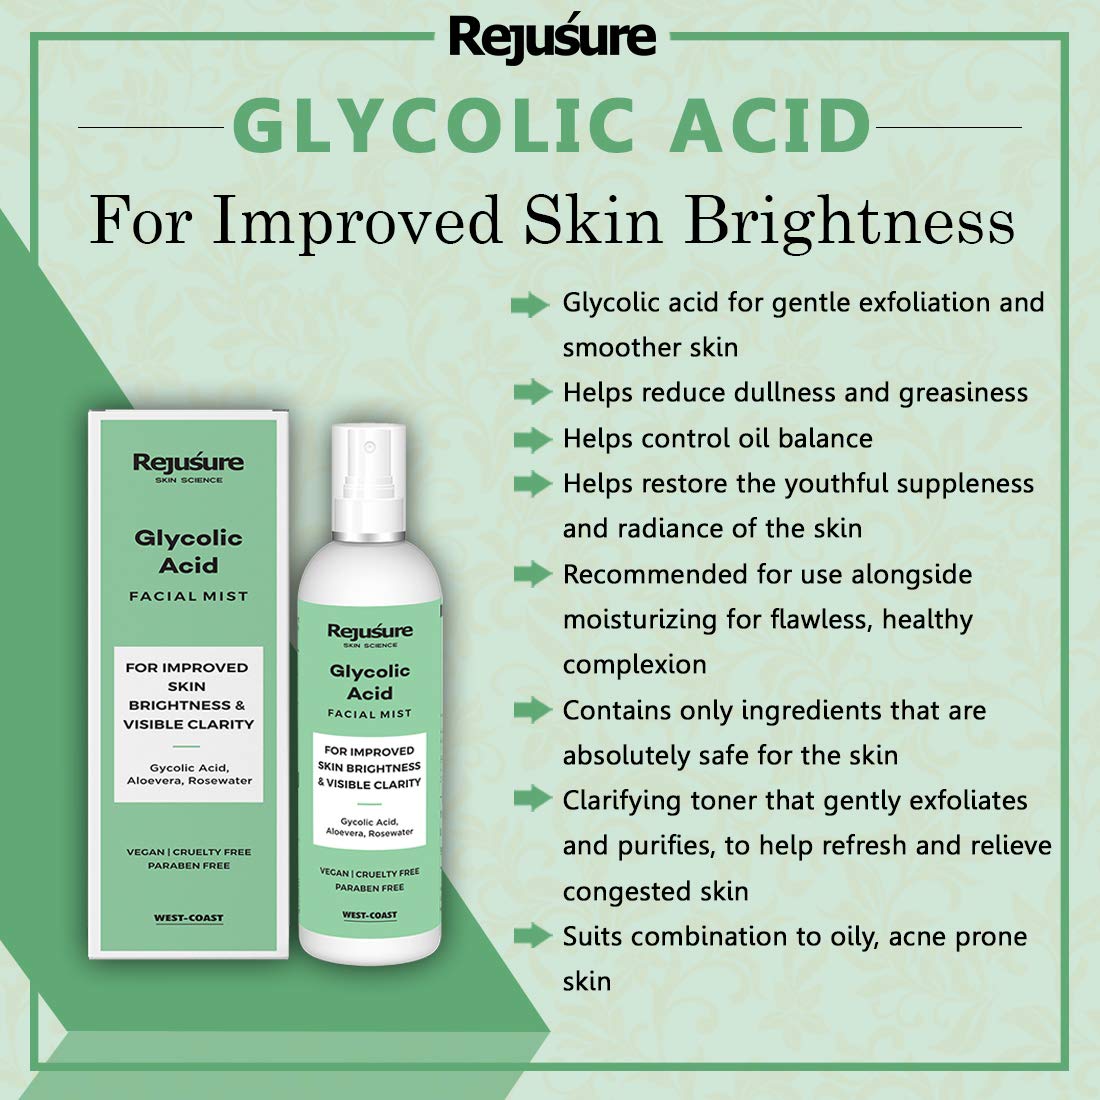 Rejusure Glycolic Acid Face mist – For Improved Skin Brightness & Visible Clarity – 100ml (Pack of 5)